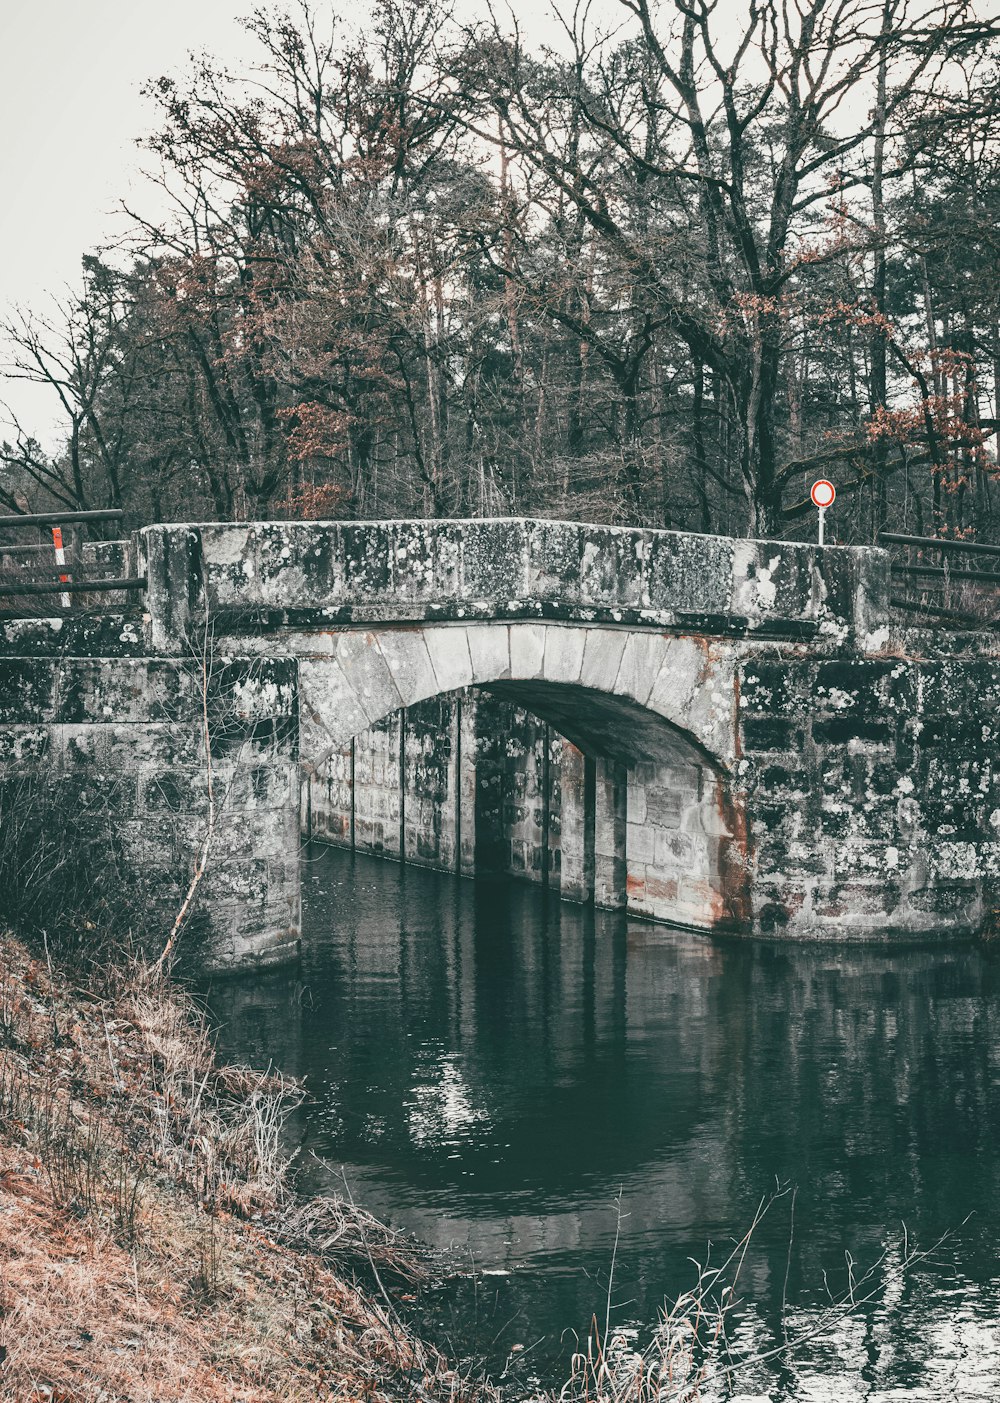 a stone bridge over a river in a wooded area